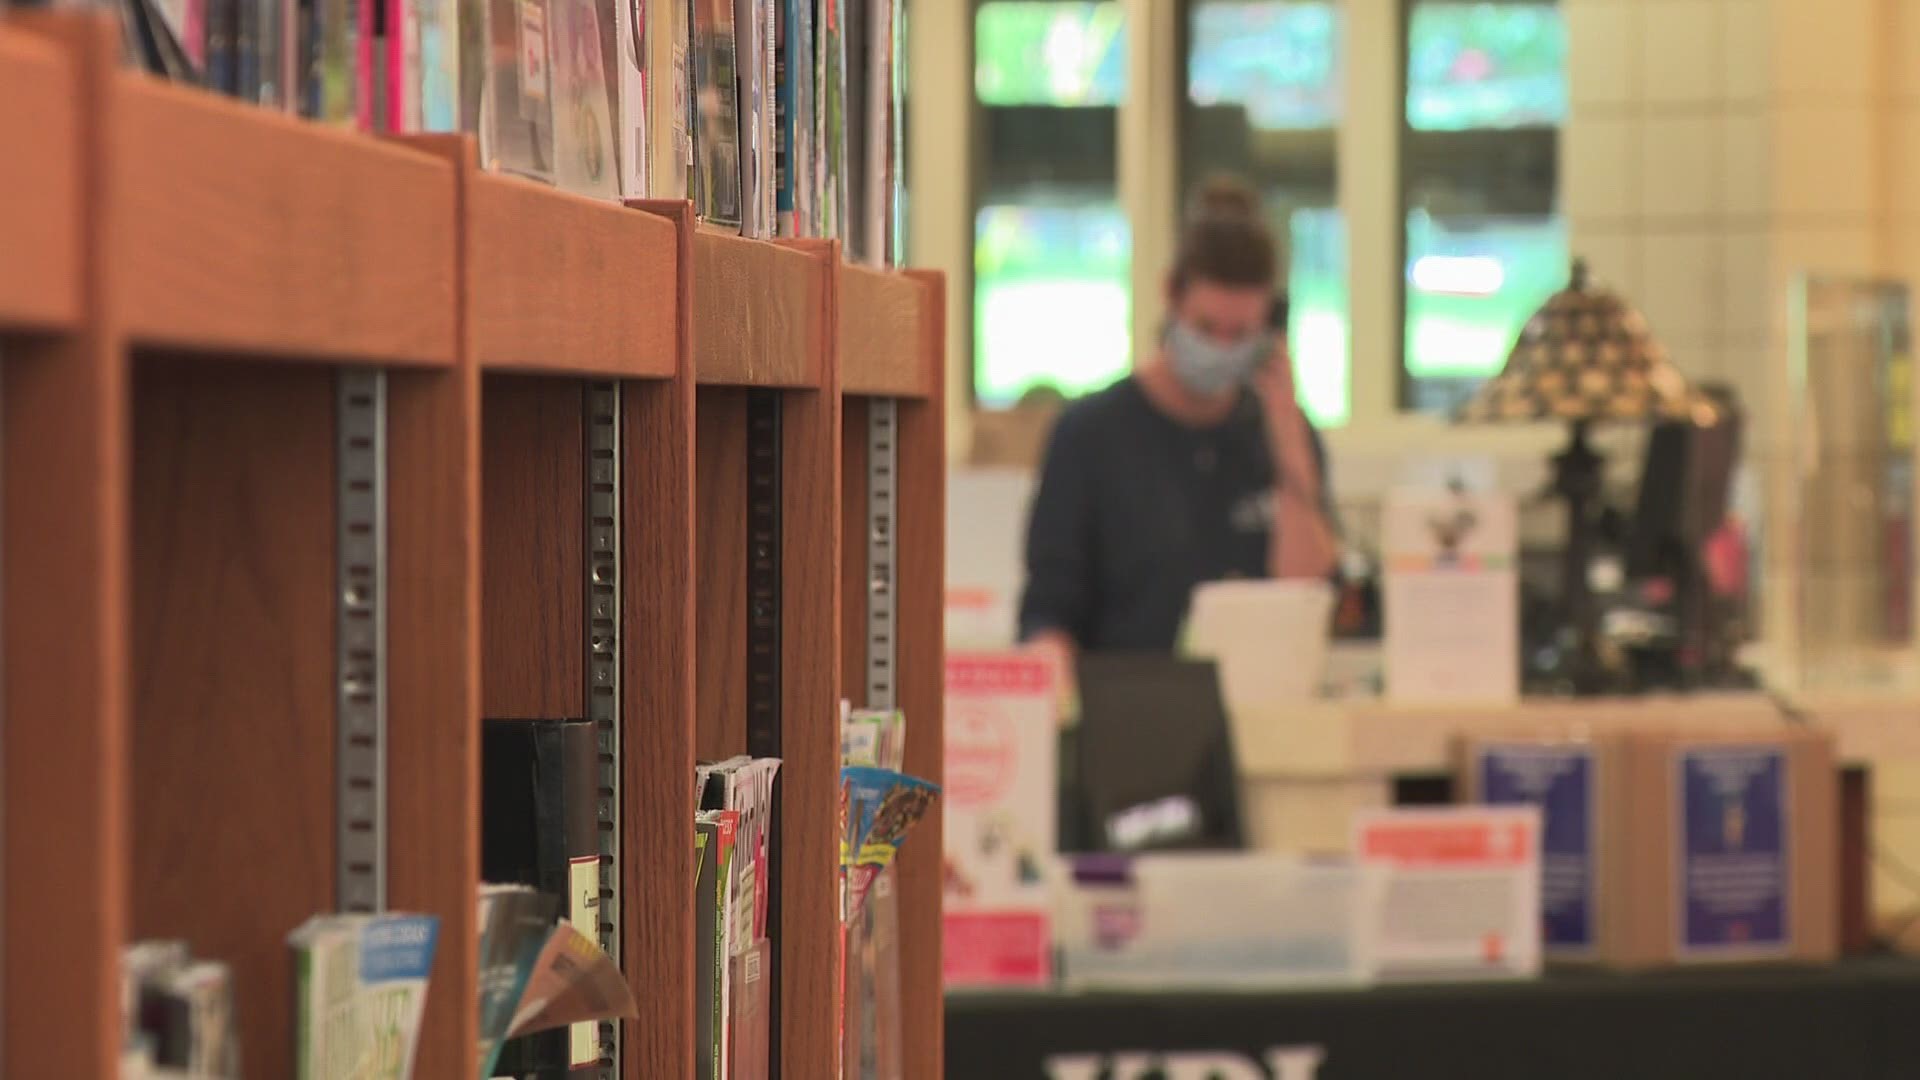 While public libraries have offered digital resources since they all closed back in March, Kent District Libraries have reopened to the public.